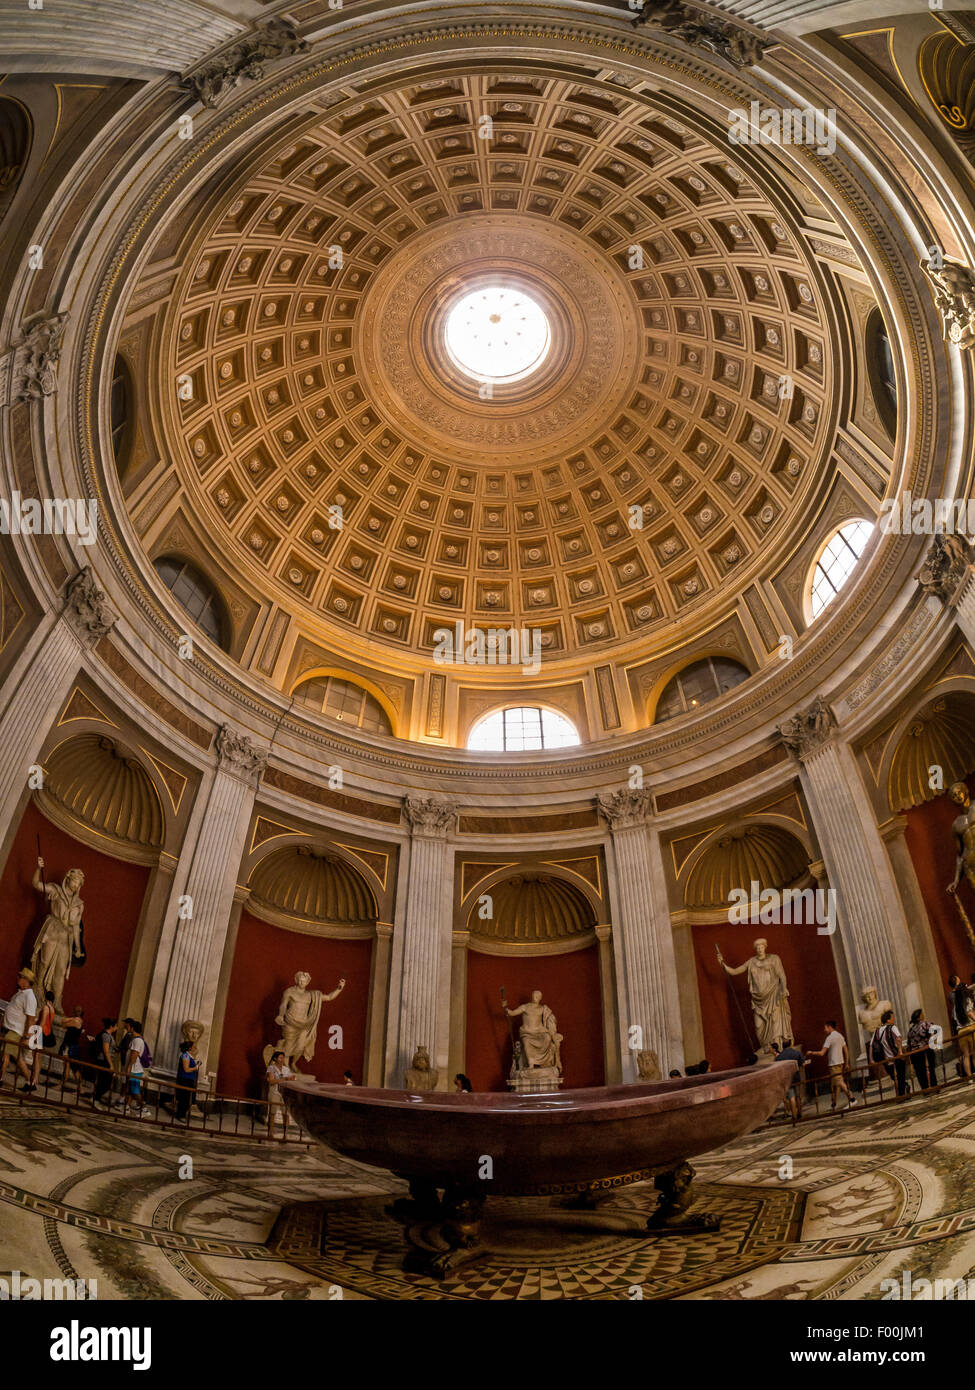 Domed ceiling Round hall at Museo Pio Clementino. Sala Rotonda. Vatican Museums, Vatican City, Rome. Italy. Stock Photo